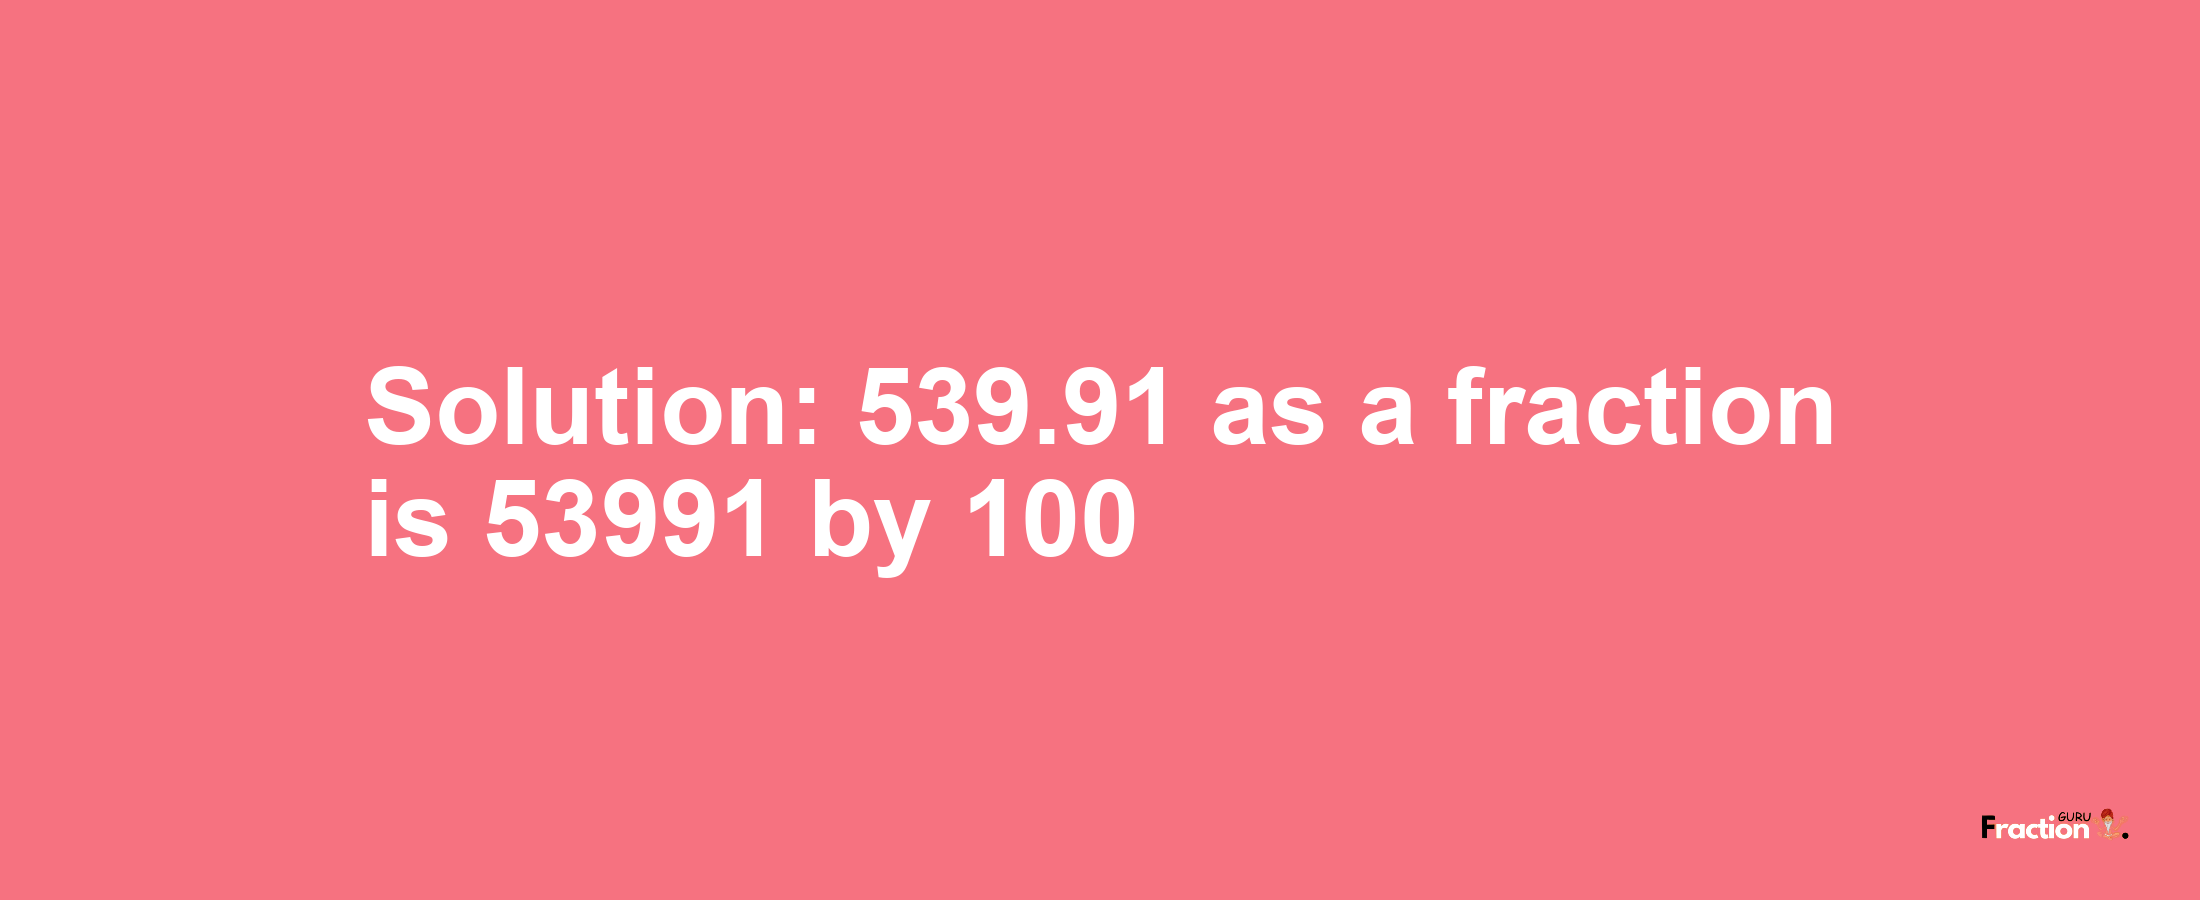 Solution:539.91 as a fraction is 53991/100